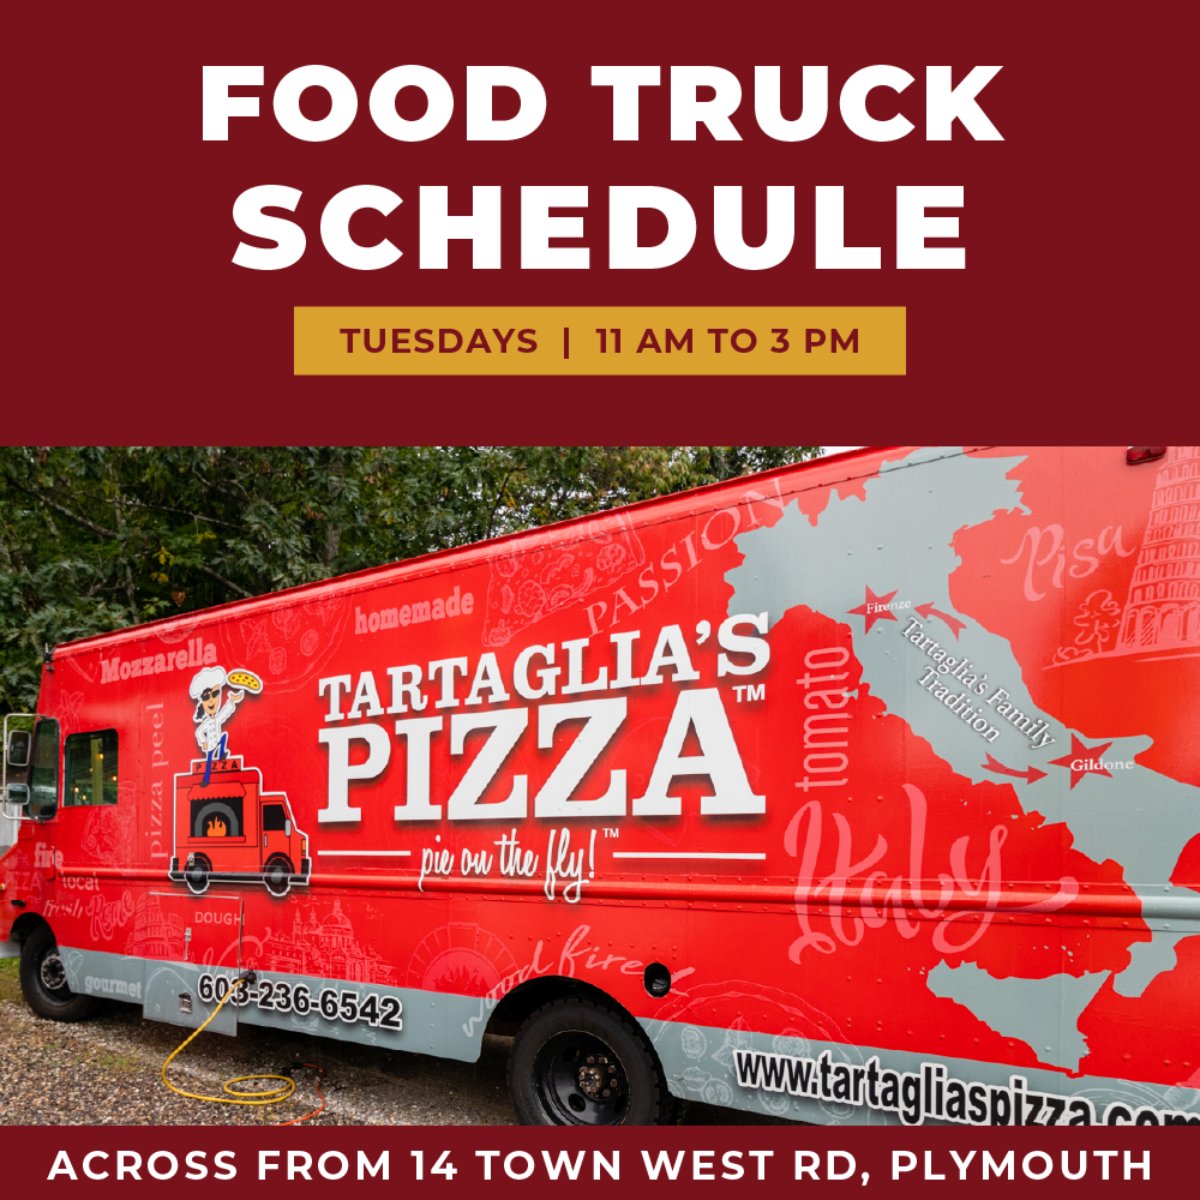 Treat yourself on Tuesdays to your favorite dishes from Tartaglia's! We will be across the street from 14 Town West Rd, Plymouth, near the Nucar Plymouth. Come on by Tuesdays from 11 AM and 3 PM.   #TartagliasPizza #ArtisanalPizza #BrickovenPizza #CamptonNH #catering